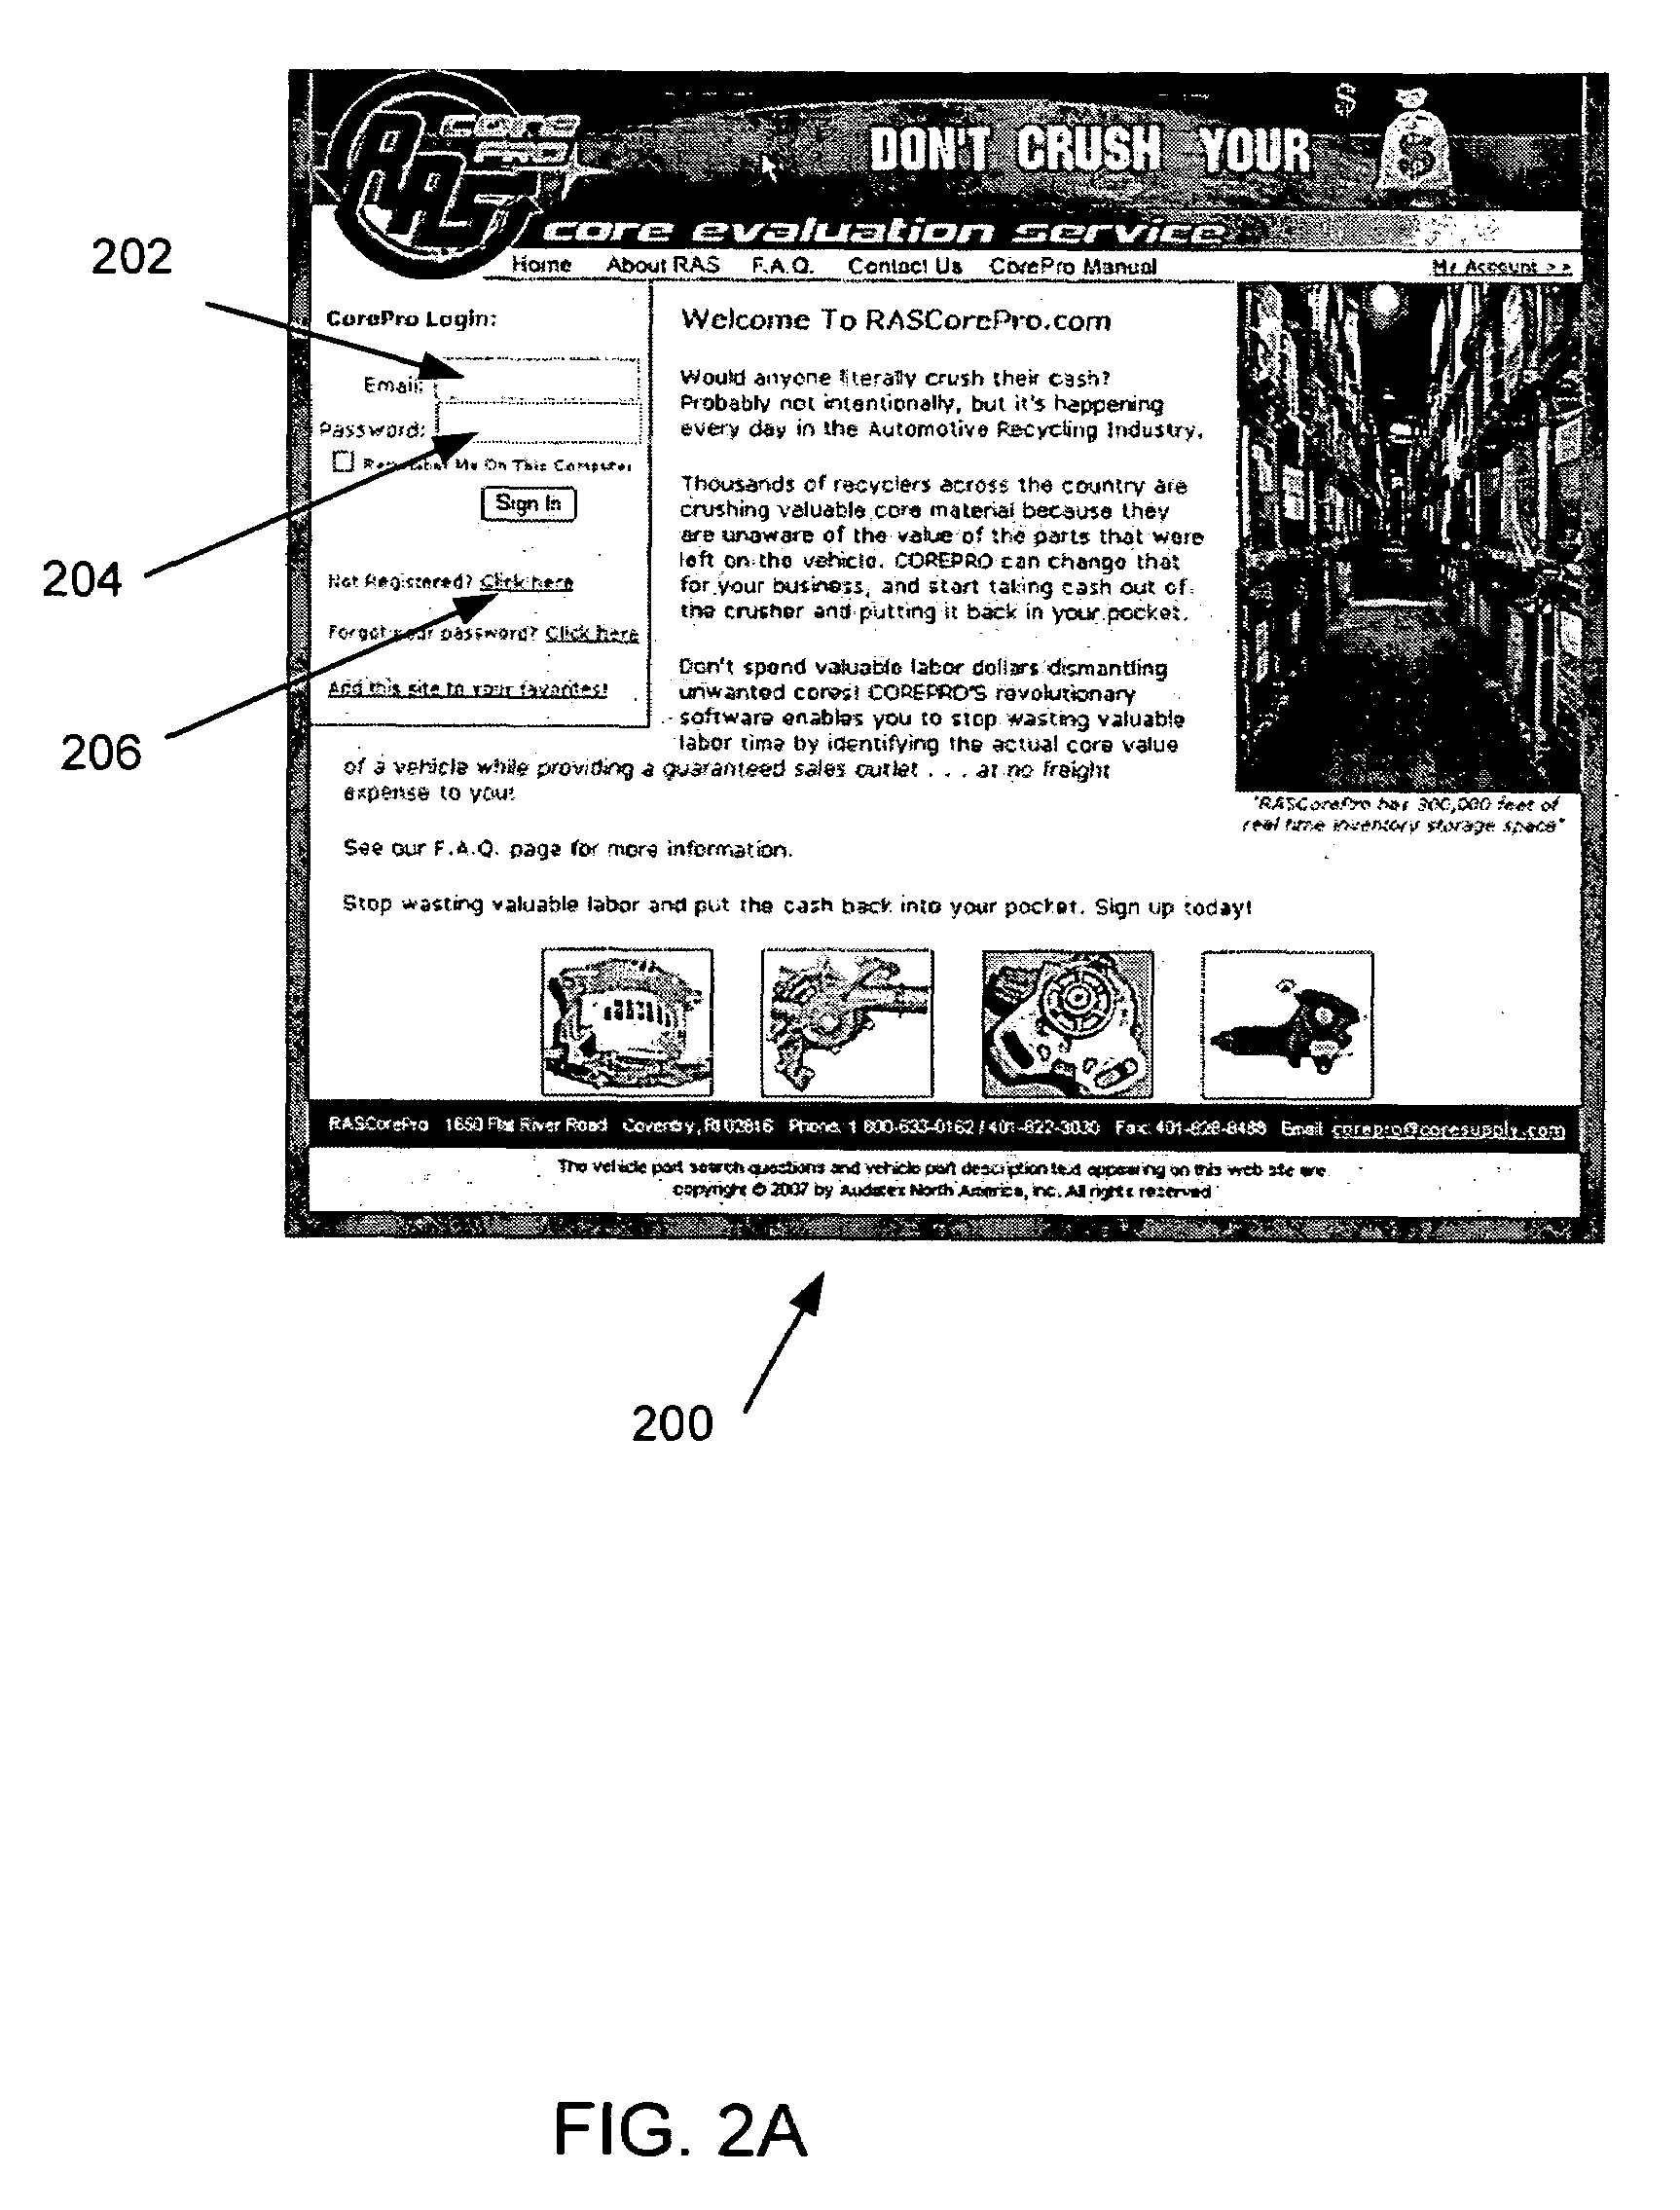 Automotive core fulfillment system and method